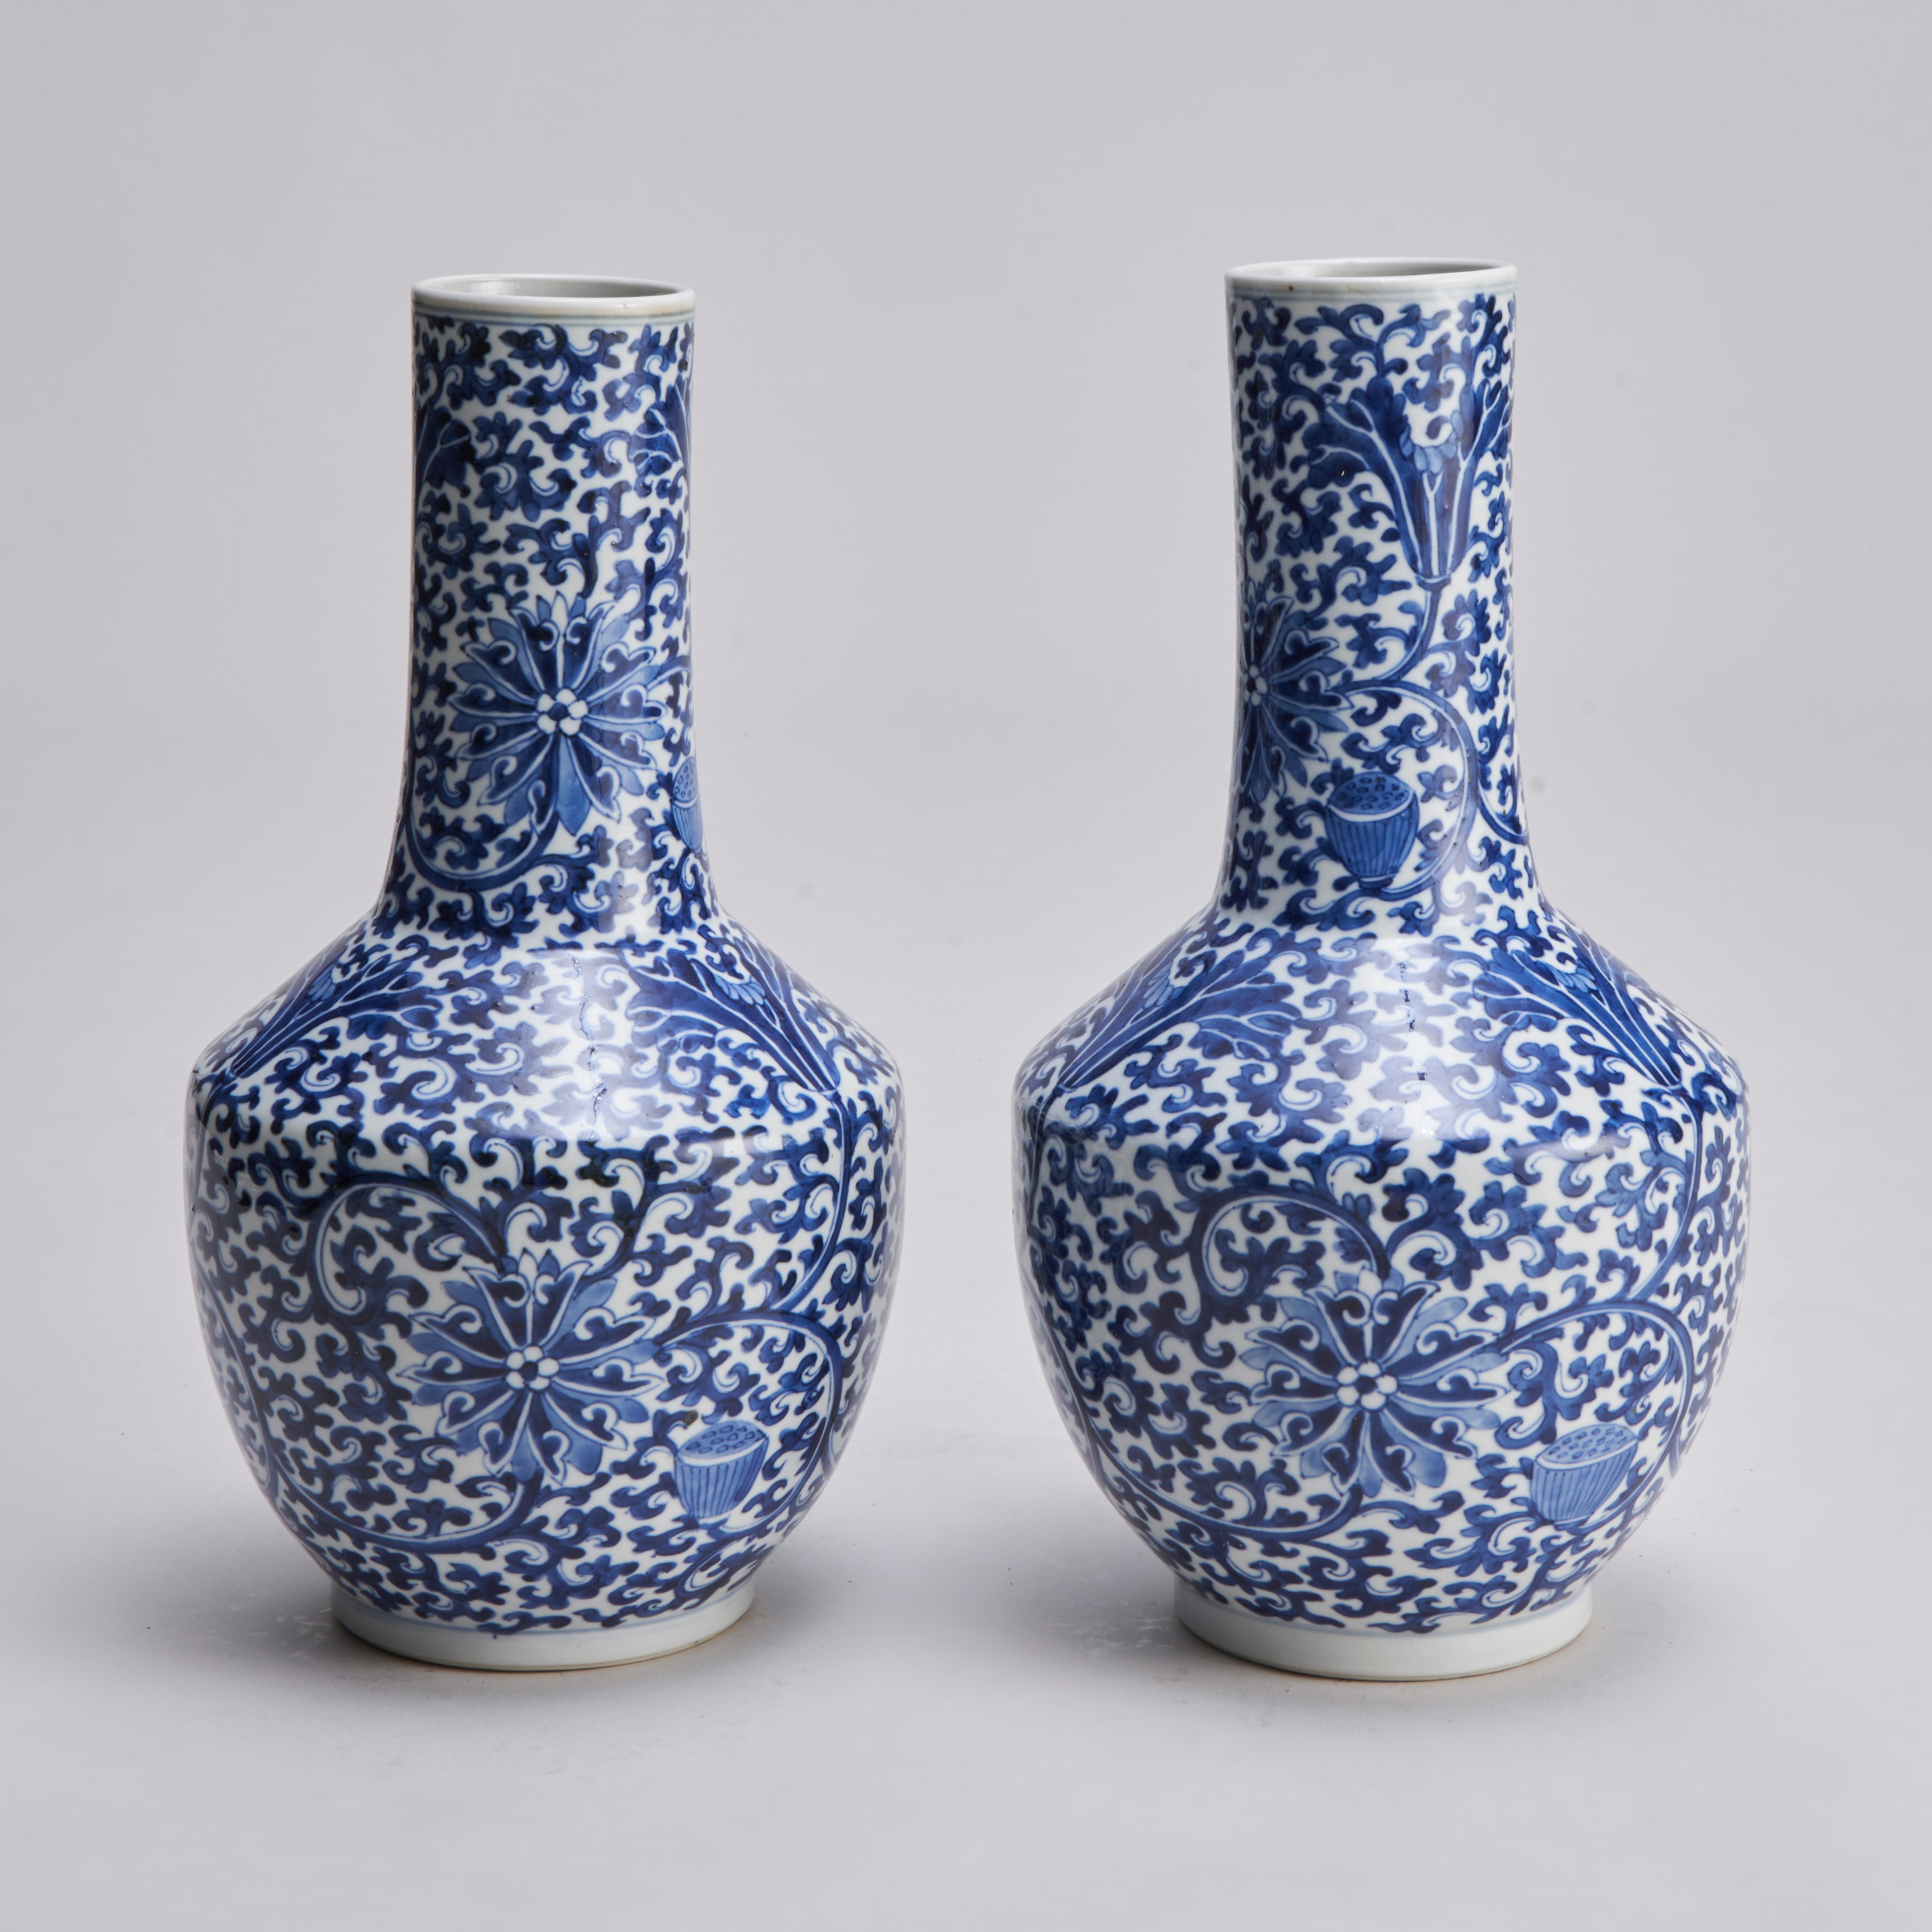 A pair of 19th century Chinese blue and white mallet shaped vase (Yaolingzun) with a dark blue glaze design of stylised lotus flowers and swirling foliage.